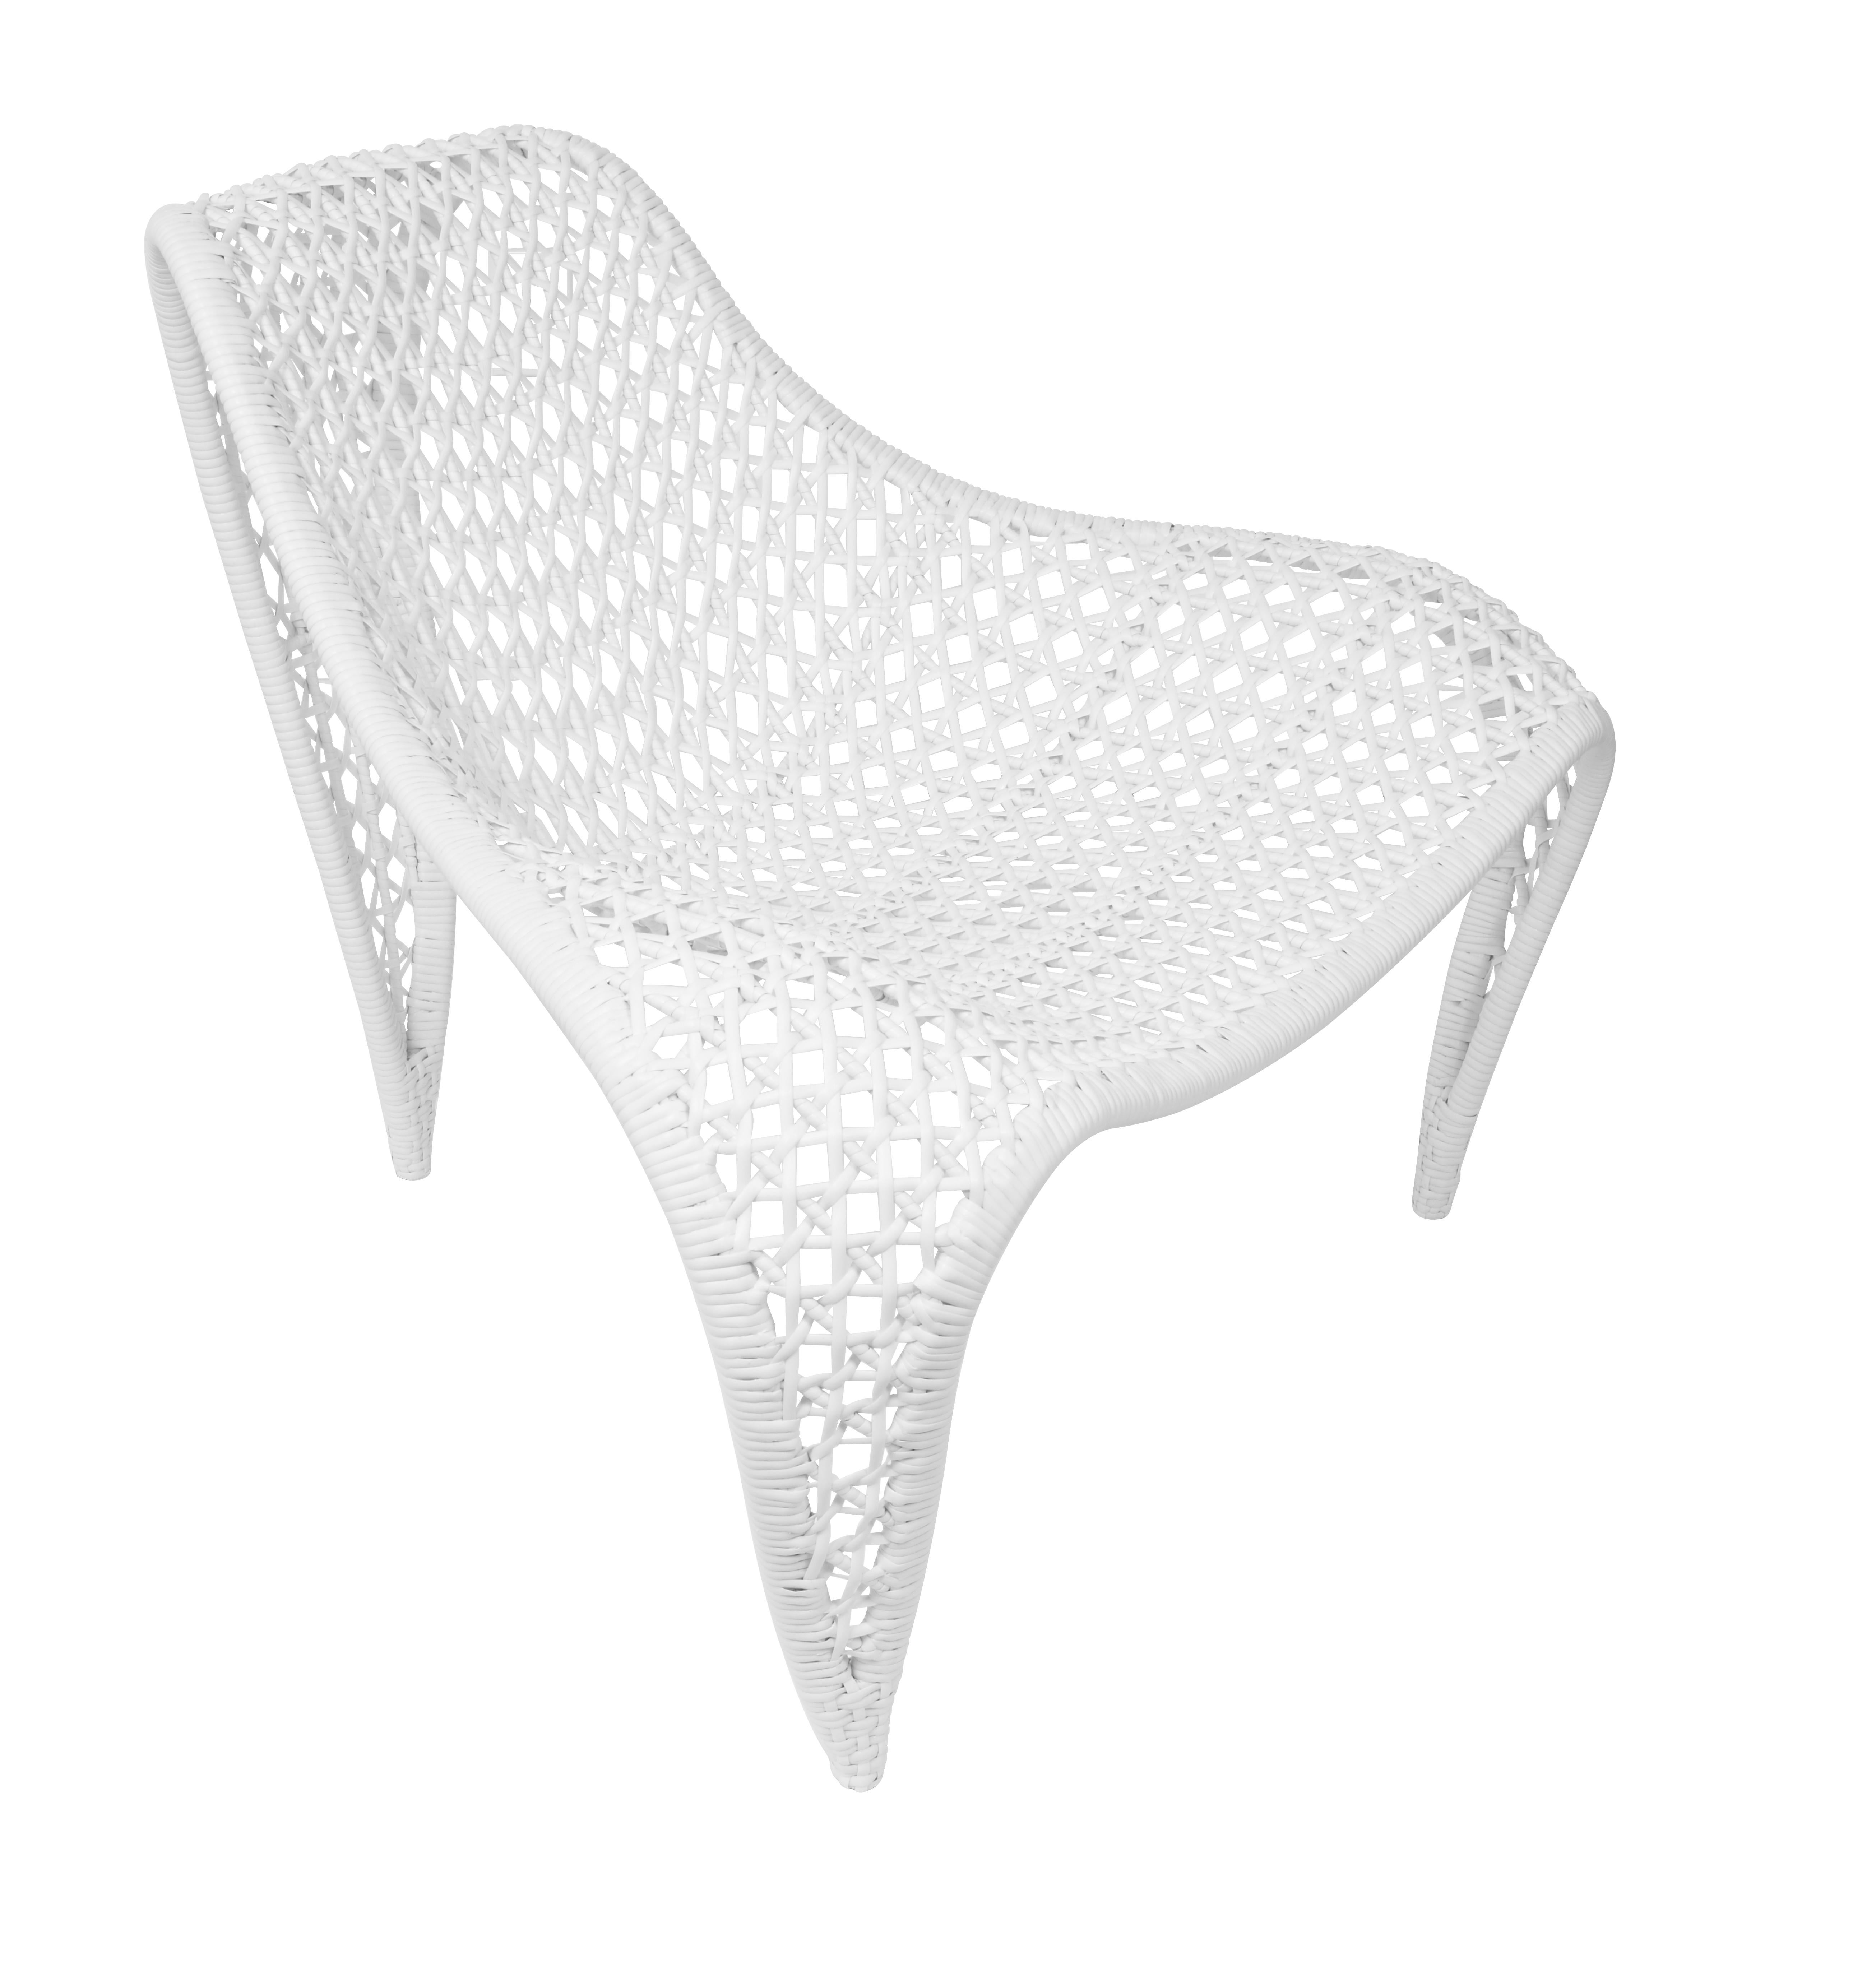 To enhance both style and comfort, supple woven leather gracefully envelops an intriguingly shaped chair.